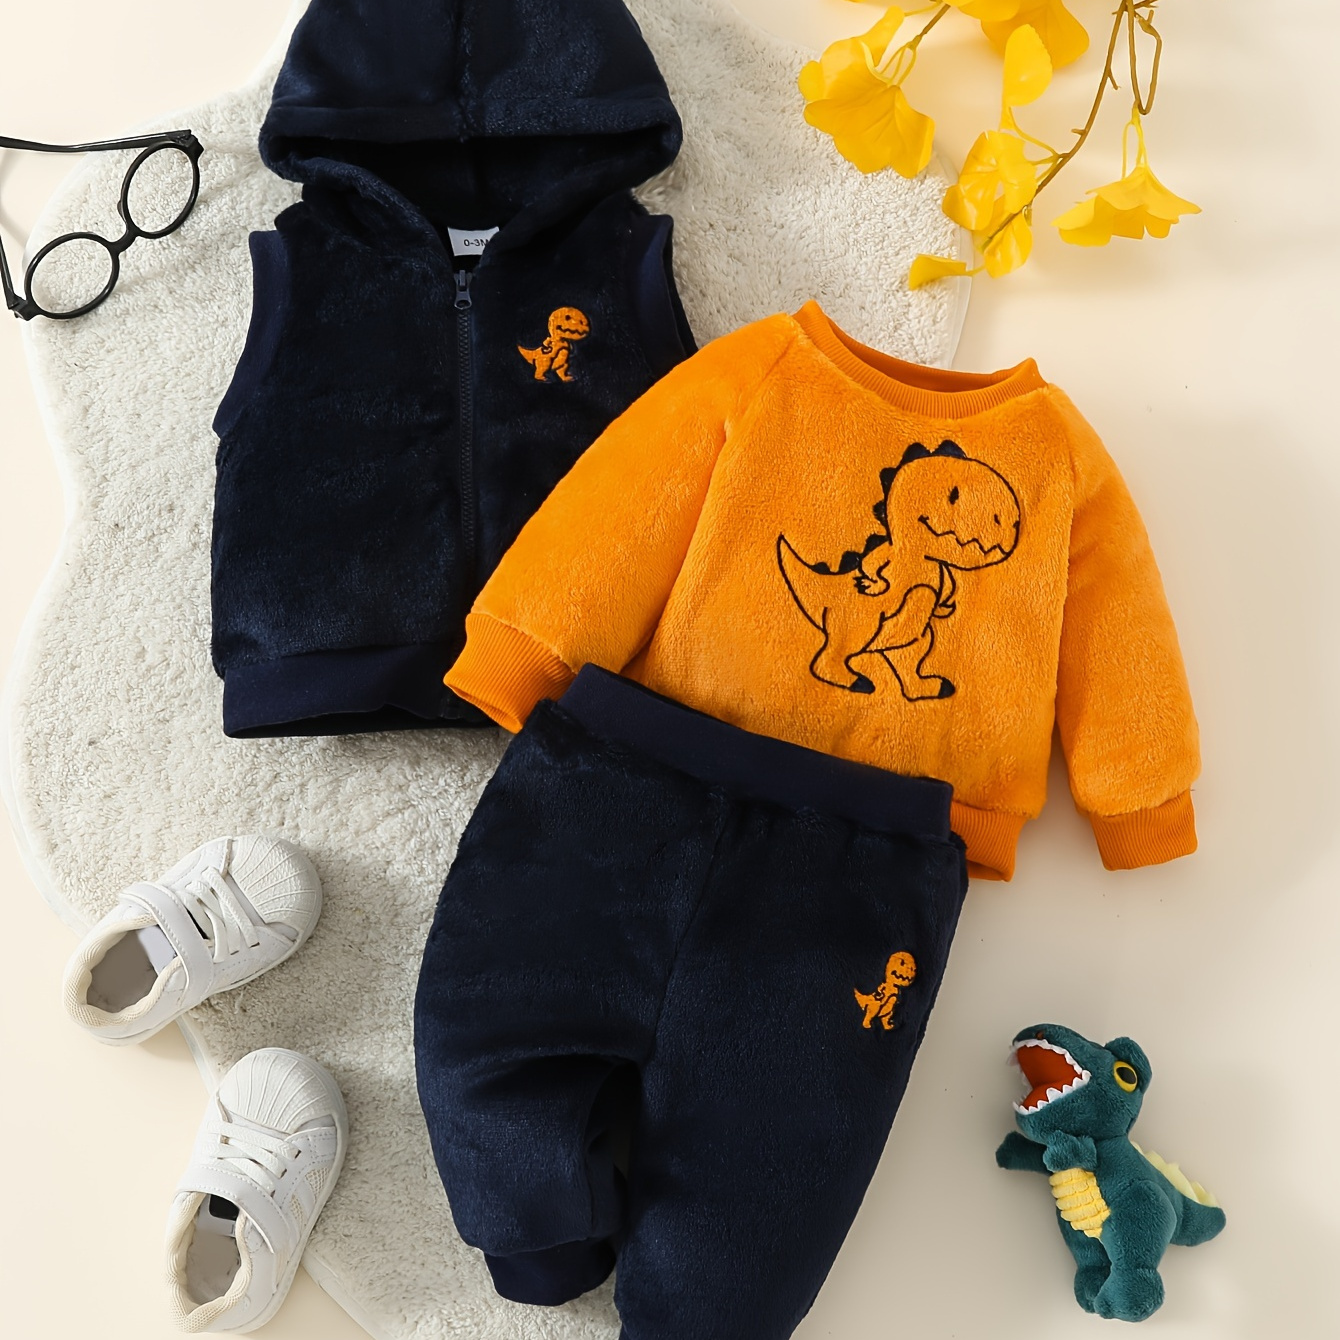 

3pcs Toddler's Dinosaur Embroidered Warm Flannel Set, Hooded Vest & Sweatshirt & Casual Pants, Baby Boy's Clothing For Winter